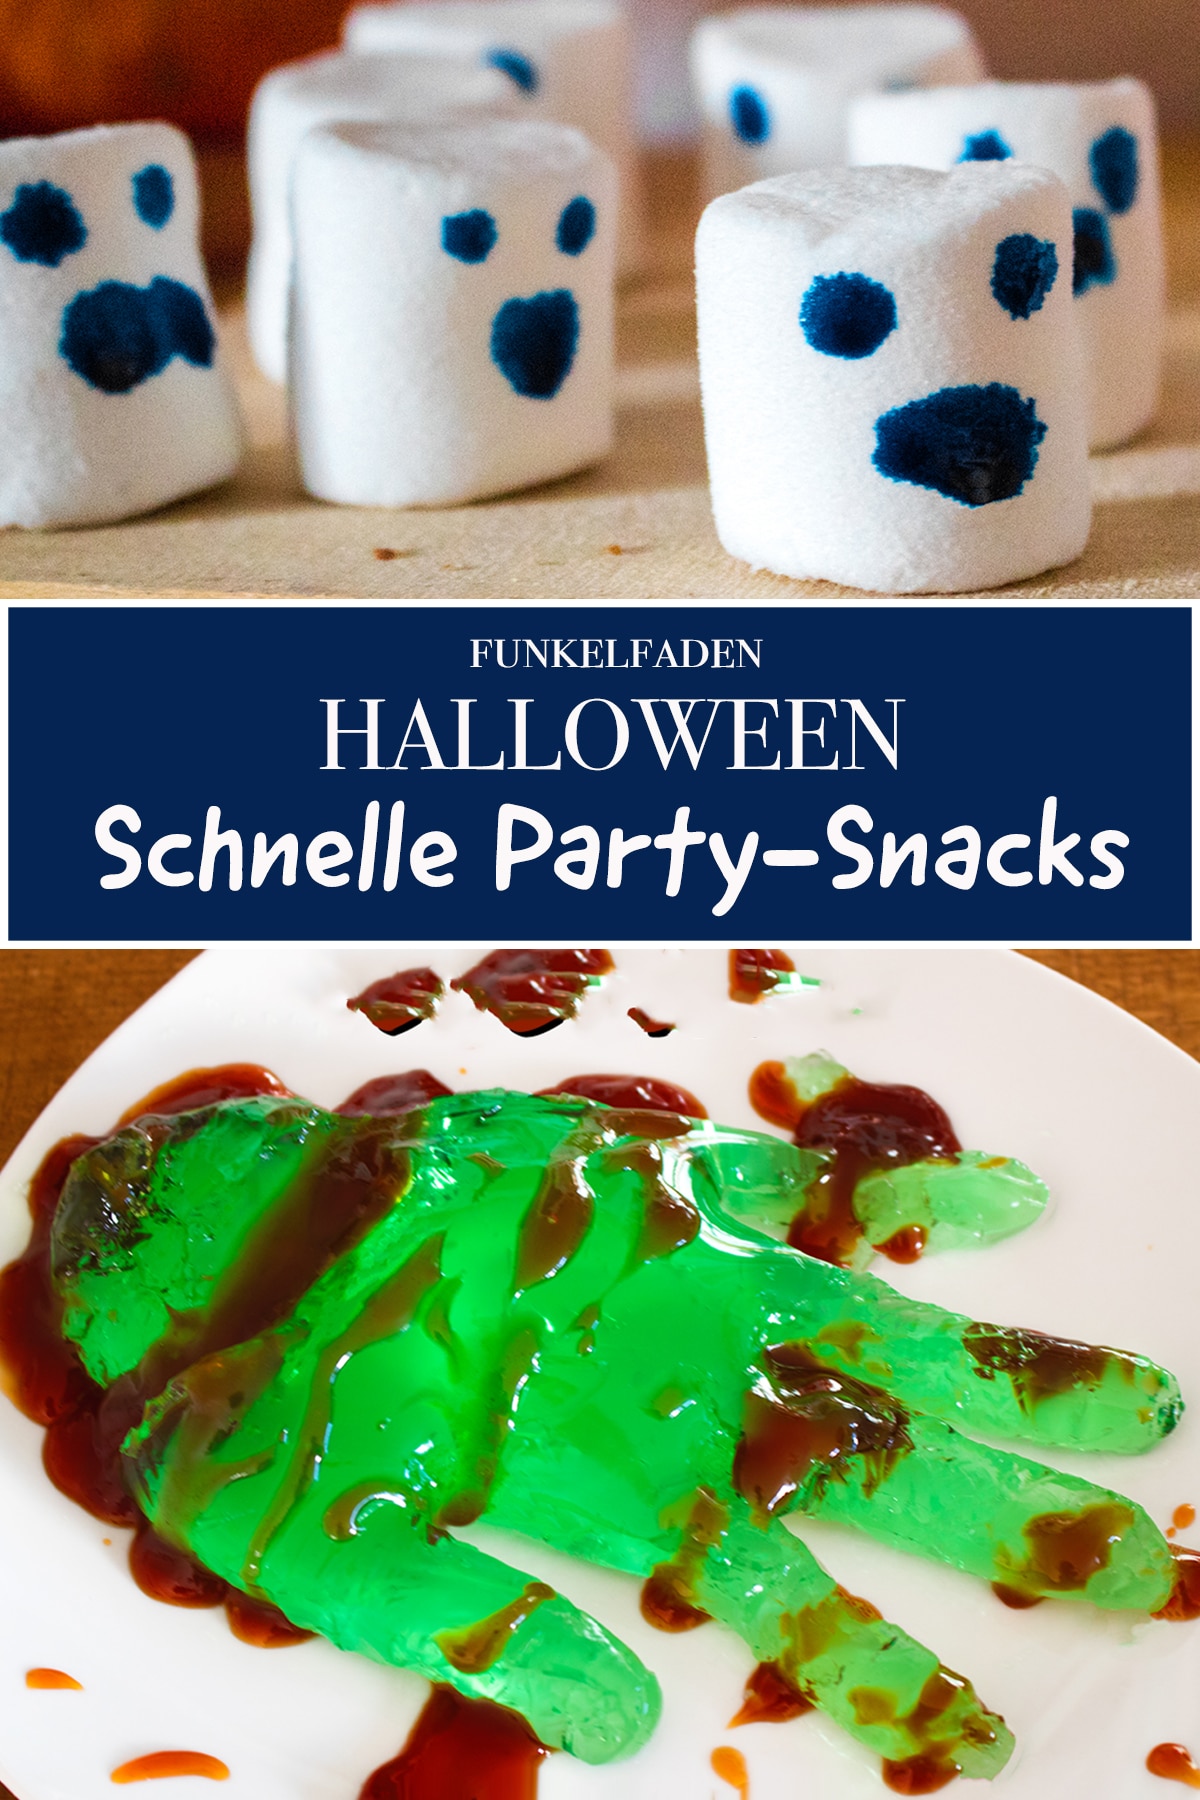 Halloween Party - Schnelle Party Snacks